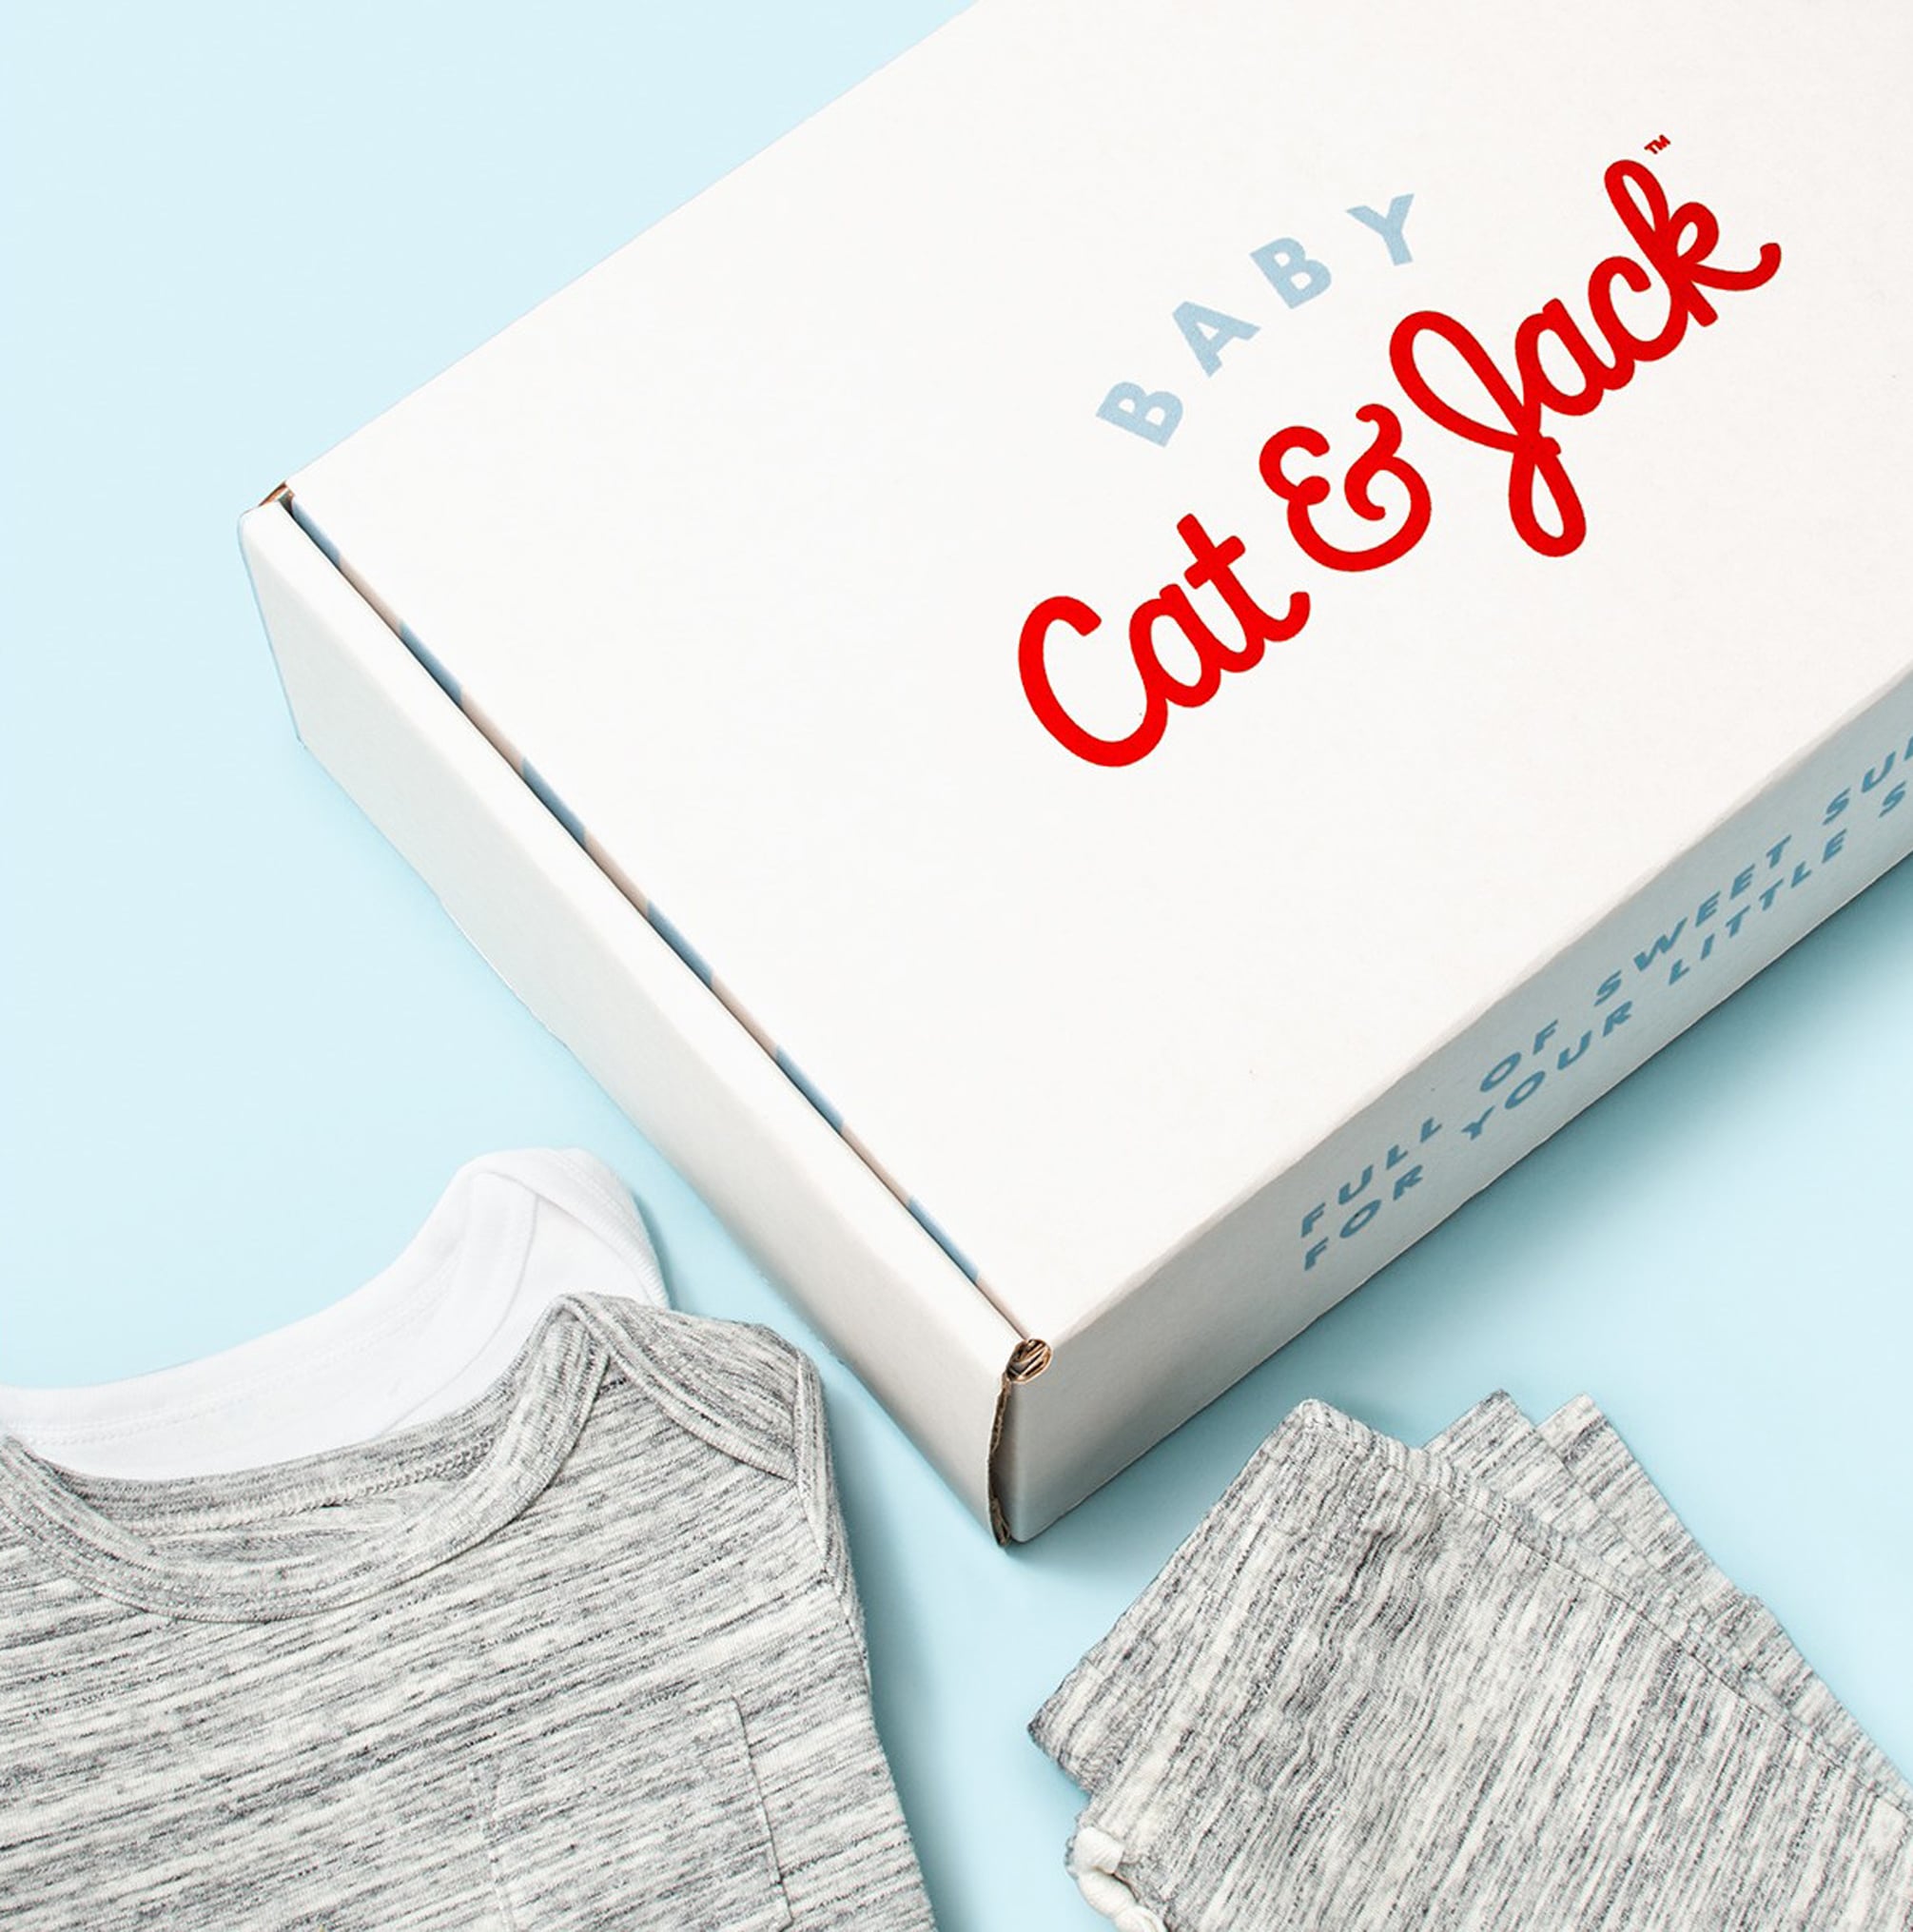 cat and jack subscription box girl